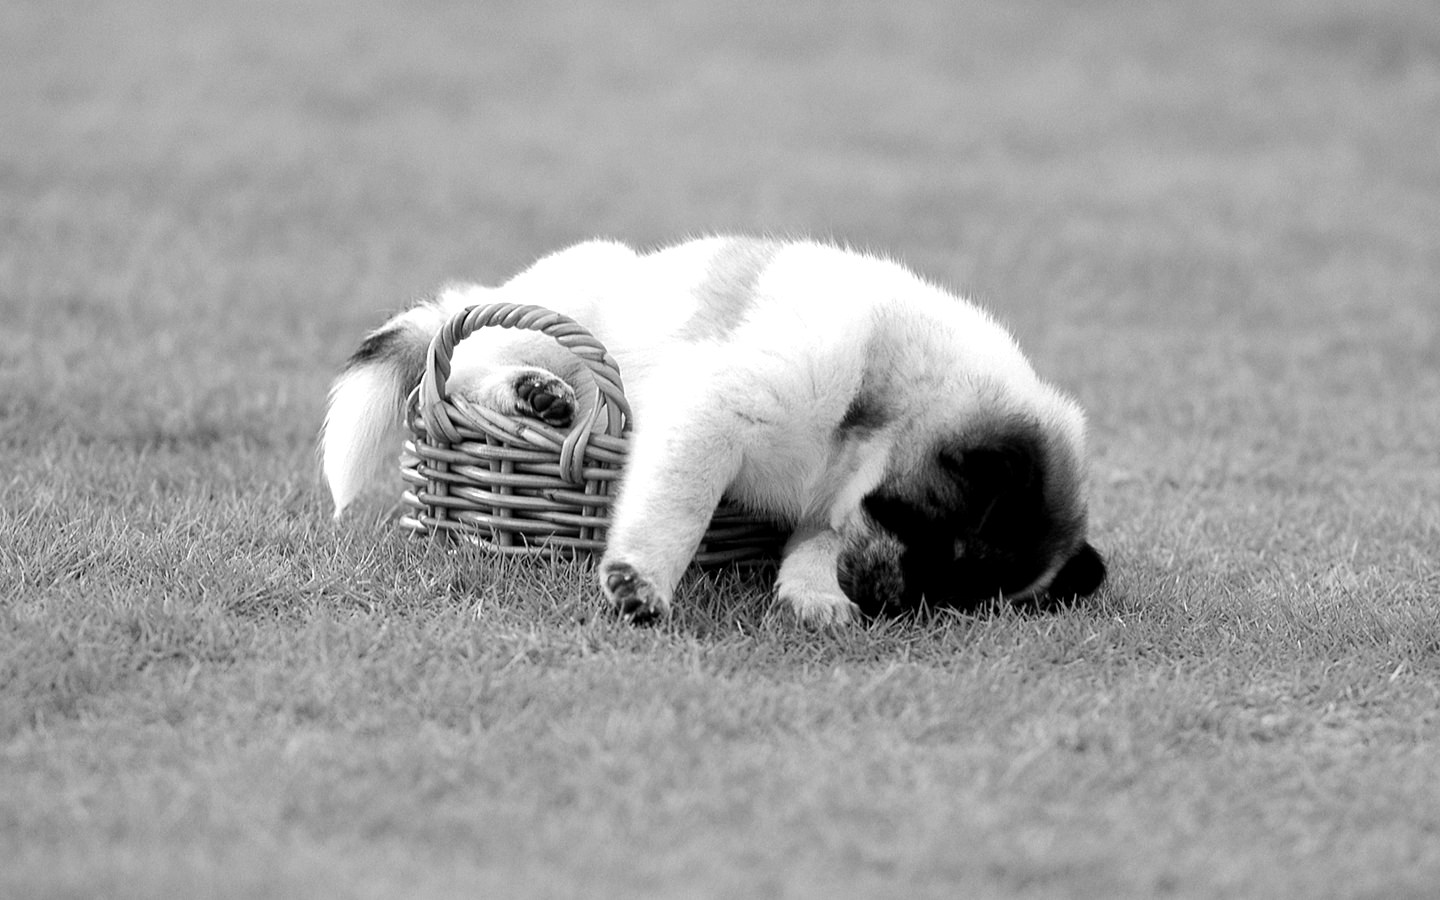 Black And White Dog Image Widescreen HD Wallpaper